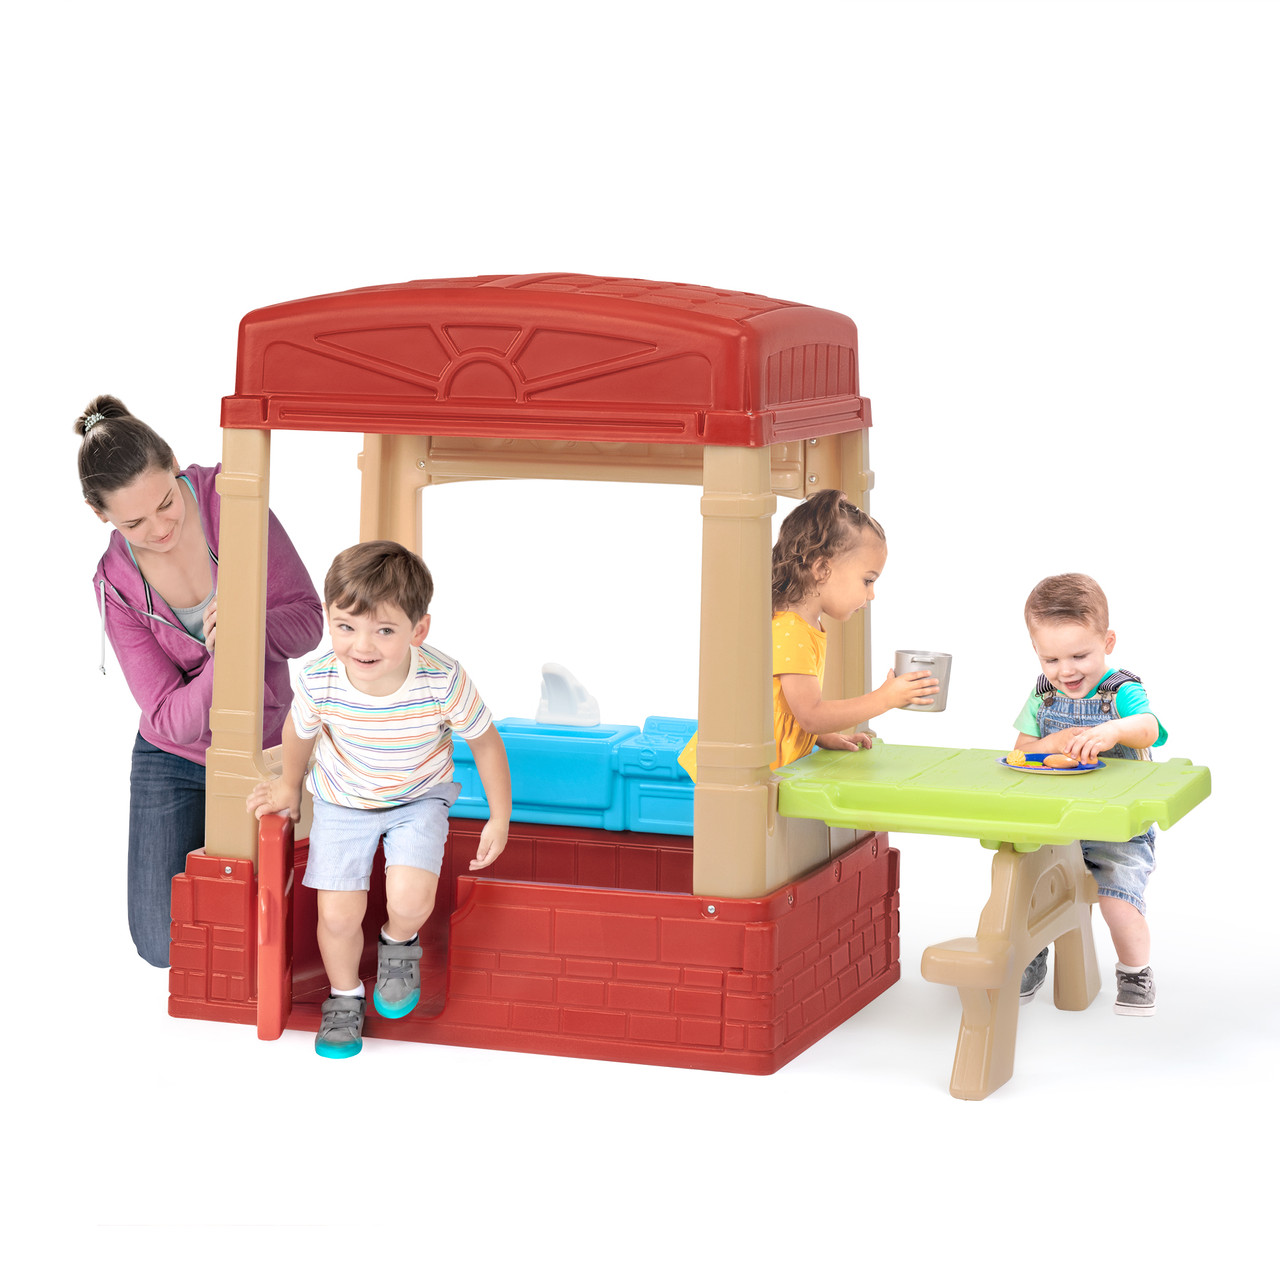 Simplay3 Sunny Day Picnic Playhouse for Kids - Indoor Outdoor Playset with  kitchen, picnic table, built-in floor, working door and more!